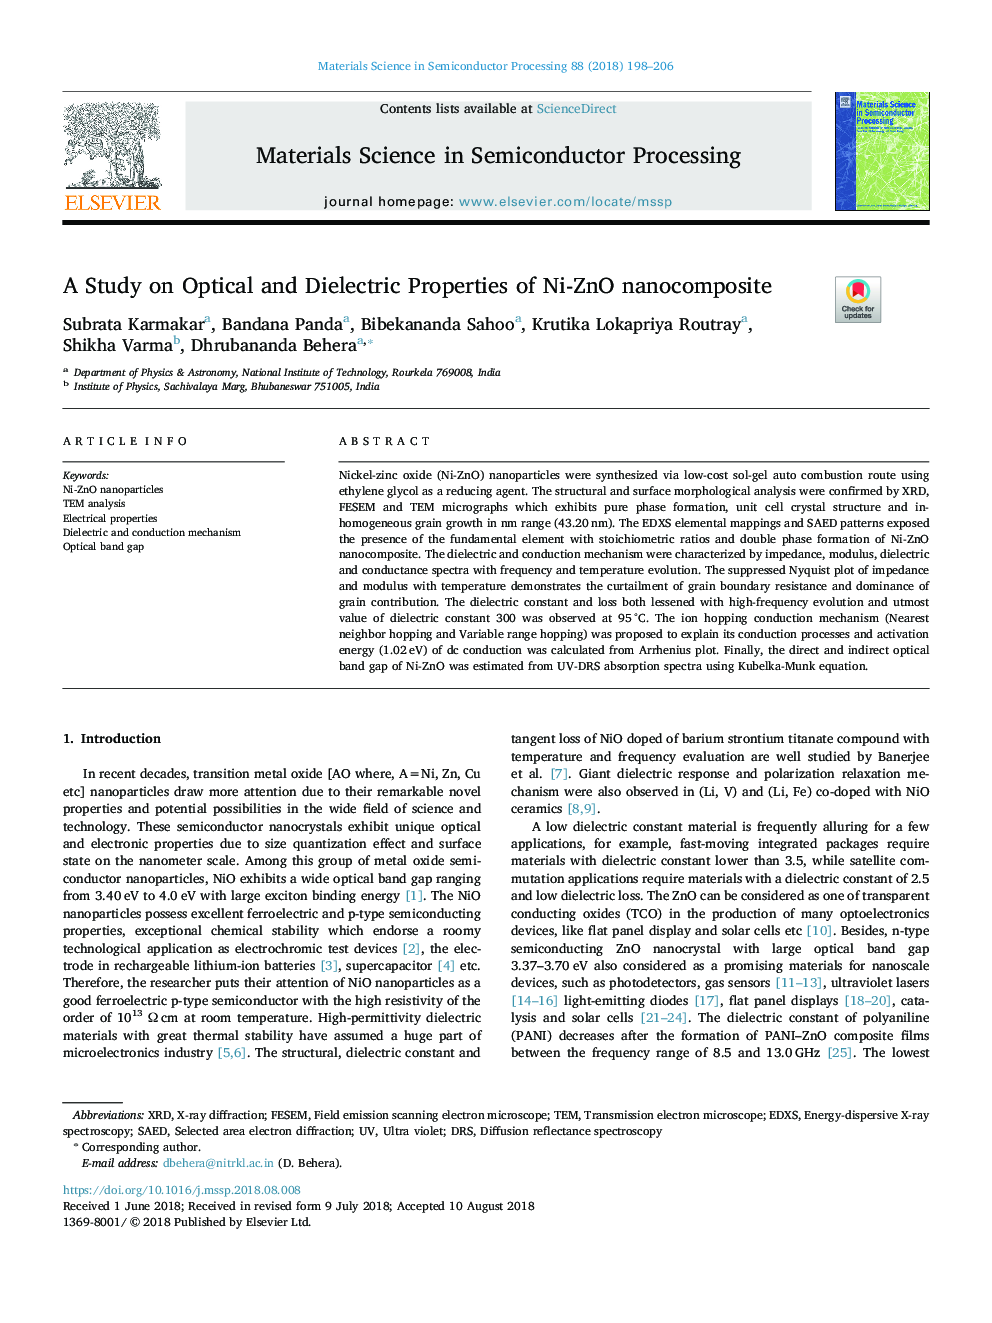 A Study on Optical and Dielectric Properties of Ni-ZnO nanocomposite